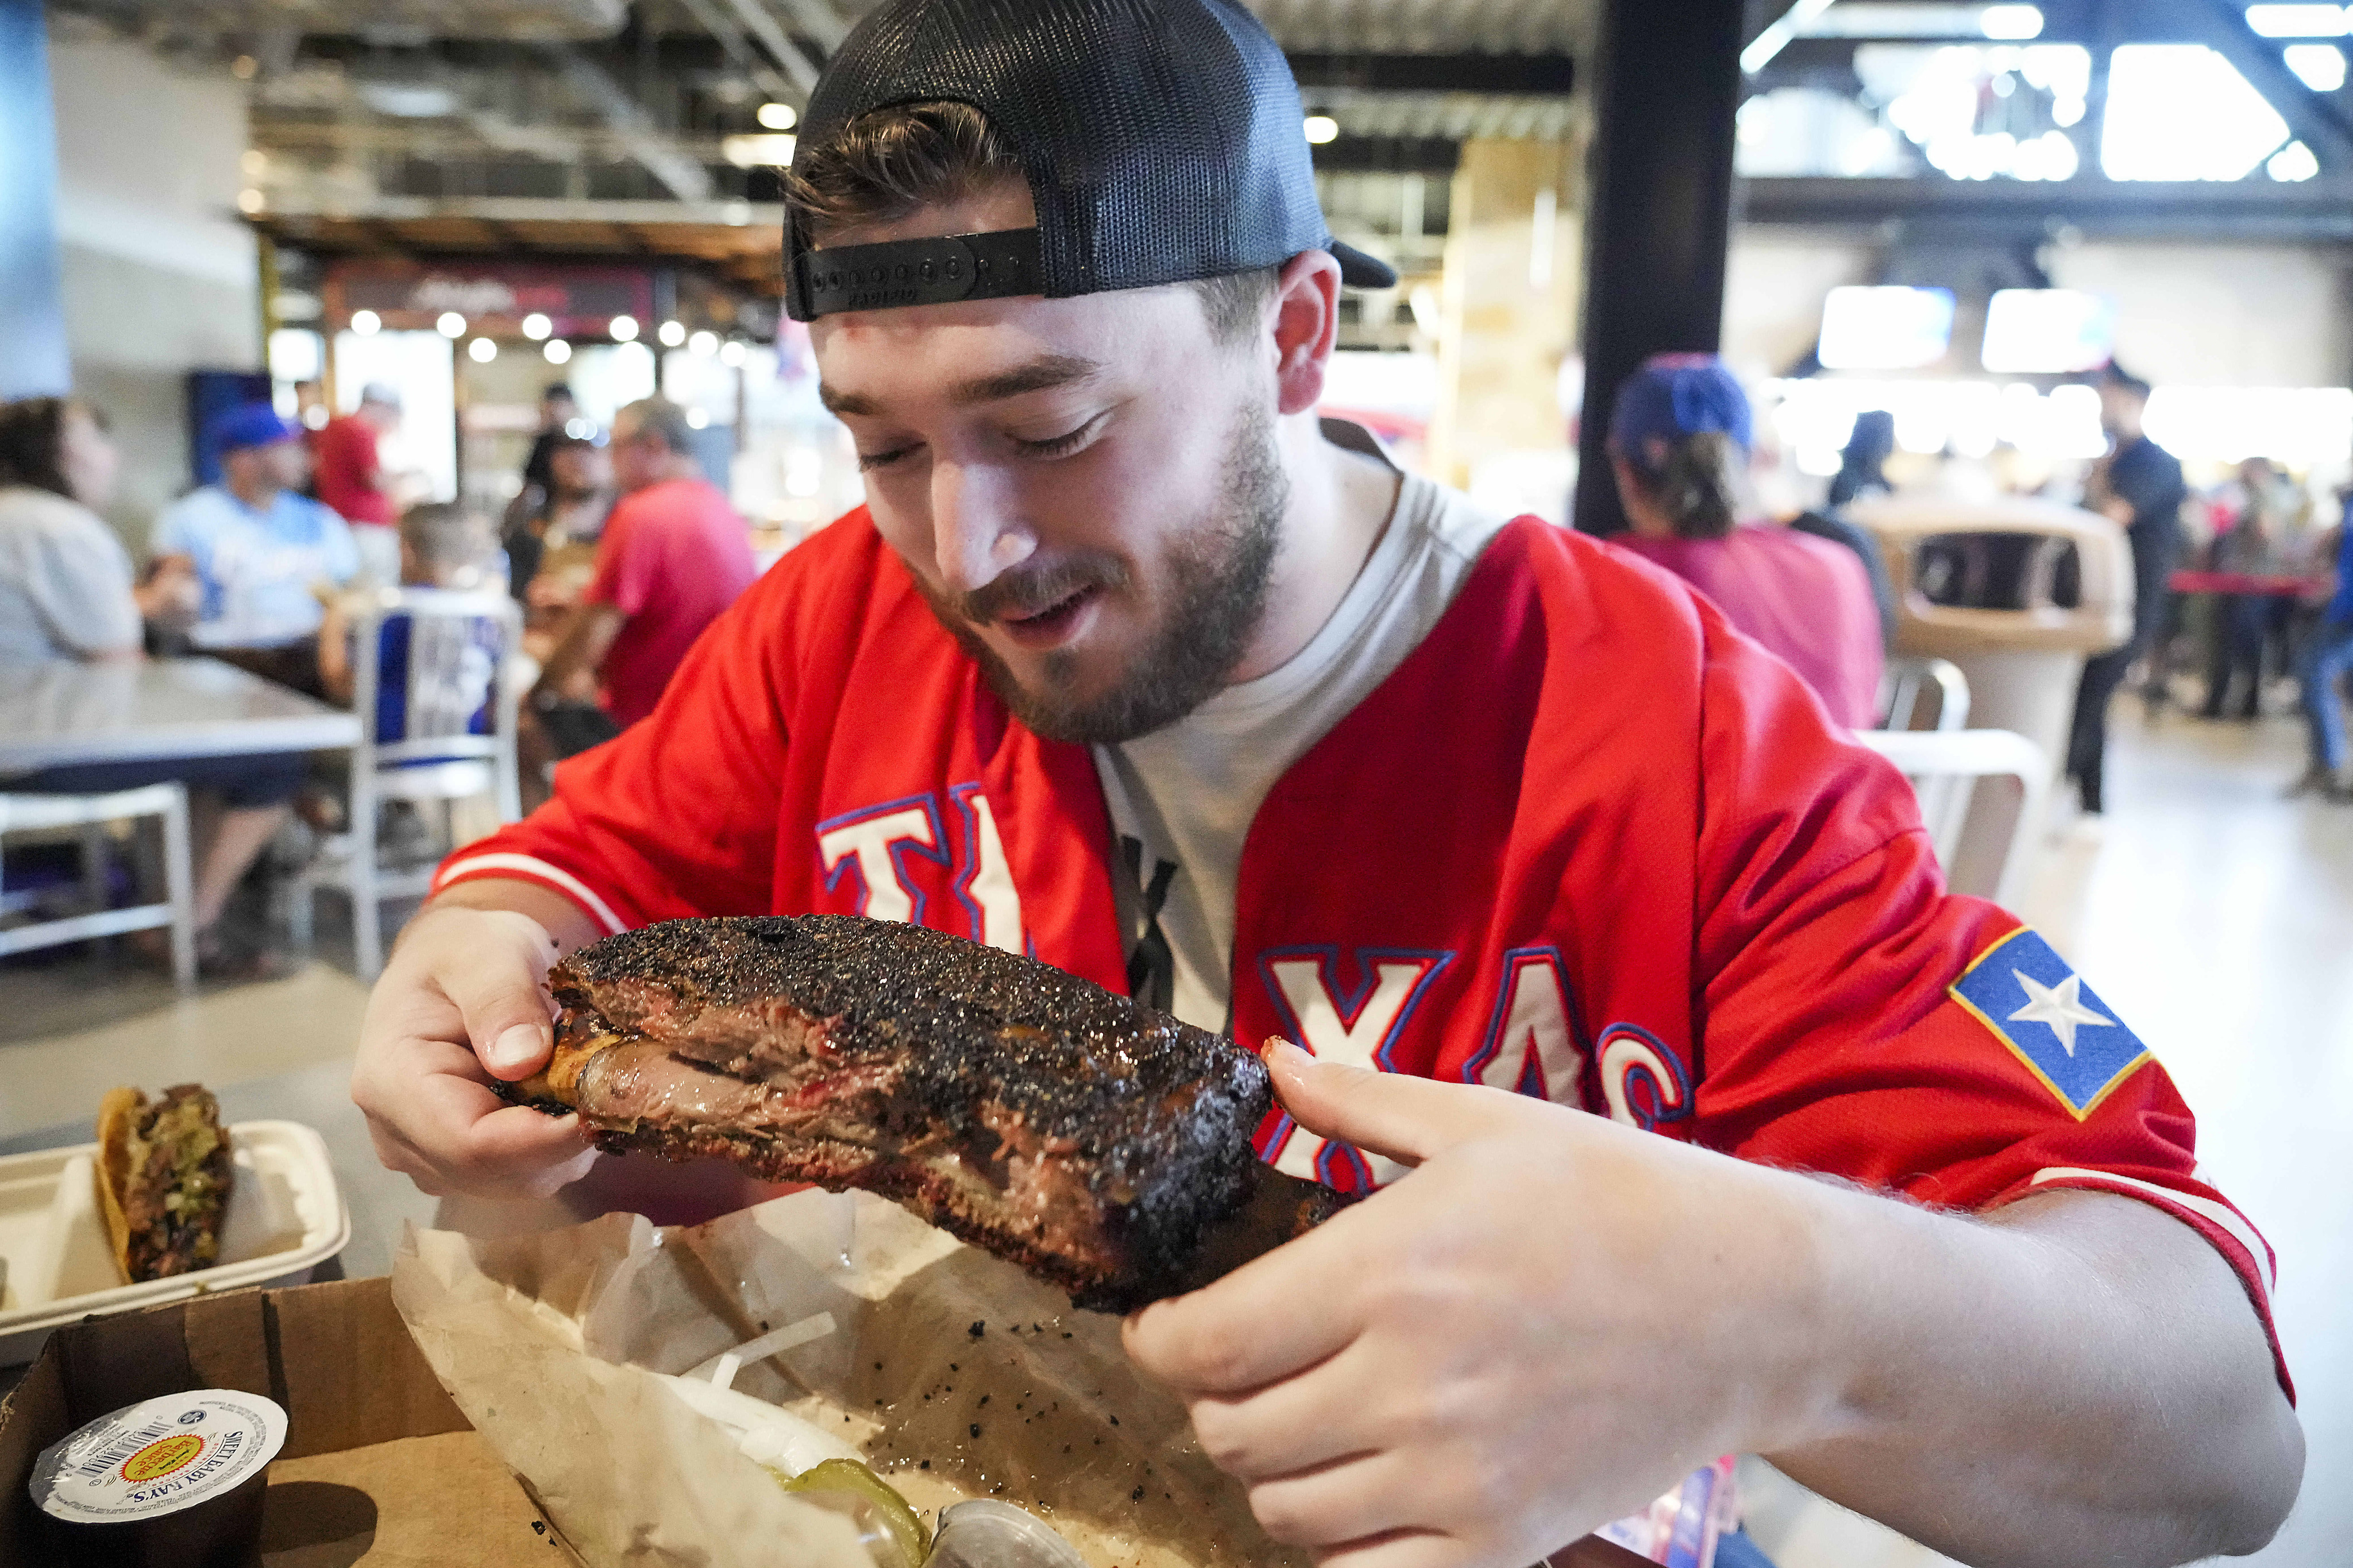 Texas Rangers - Your All-You-Can-Eat seats await!